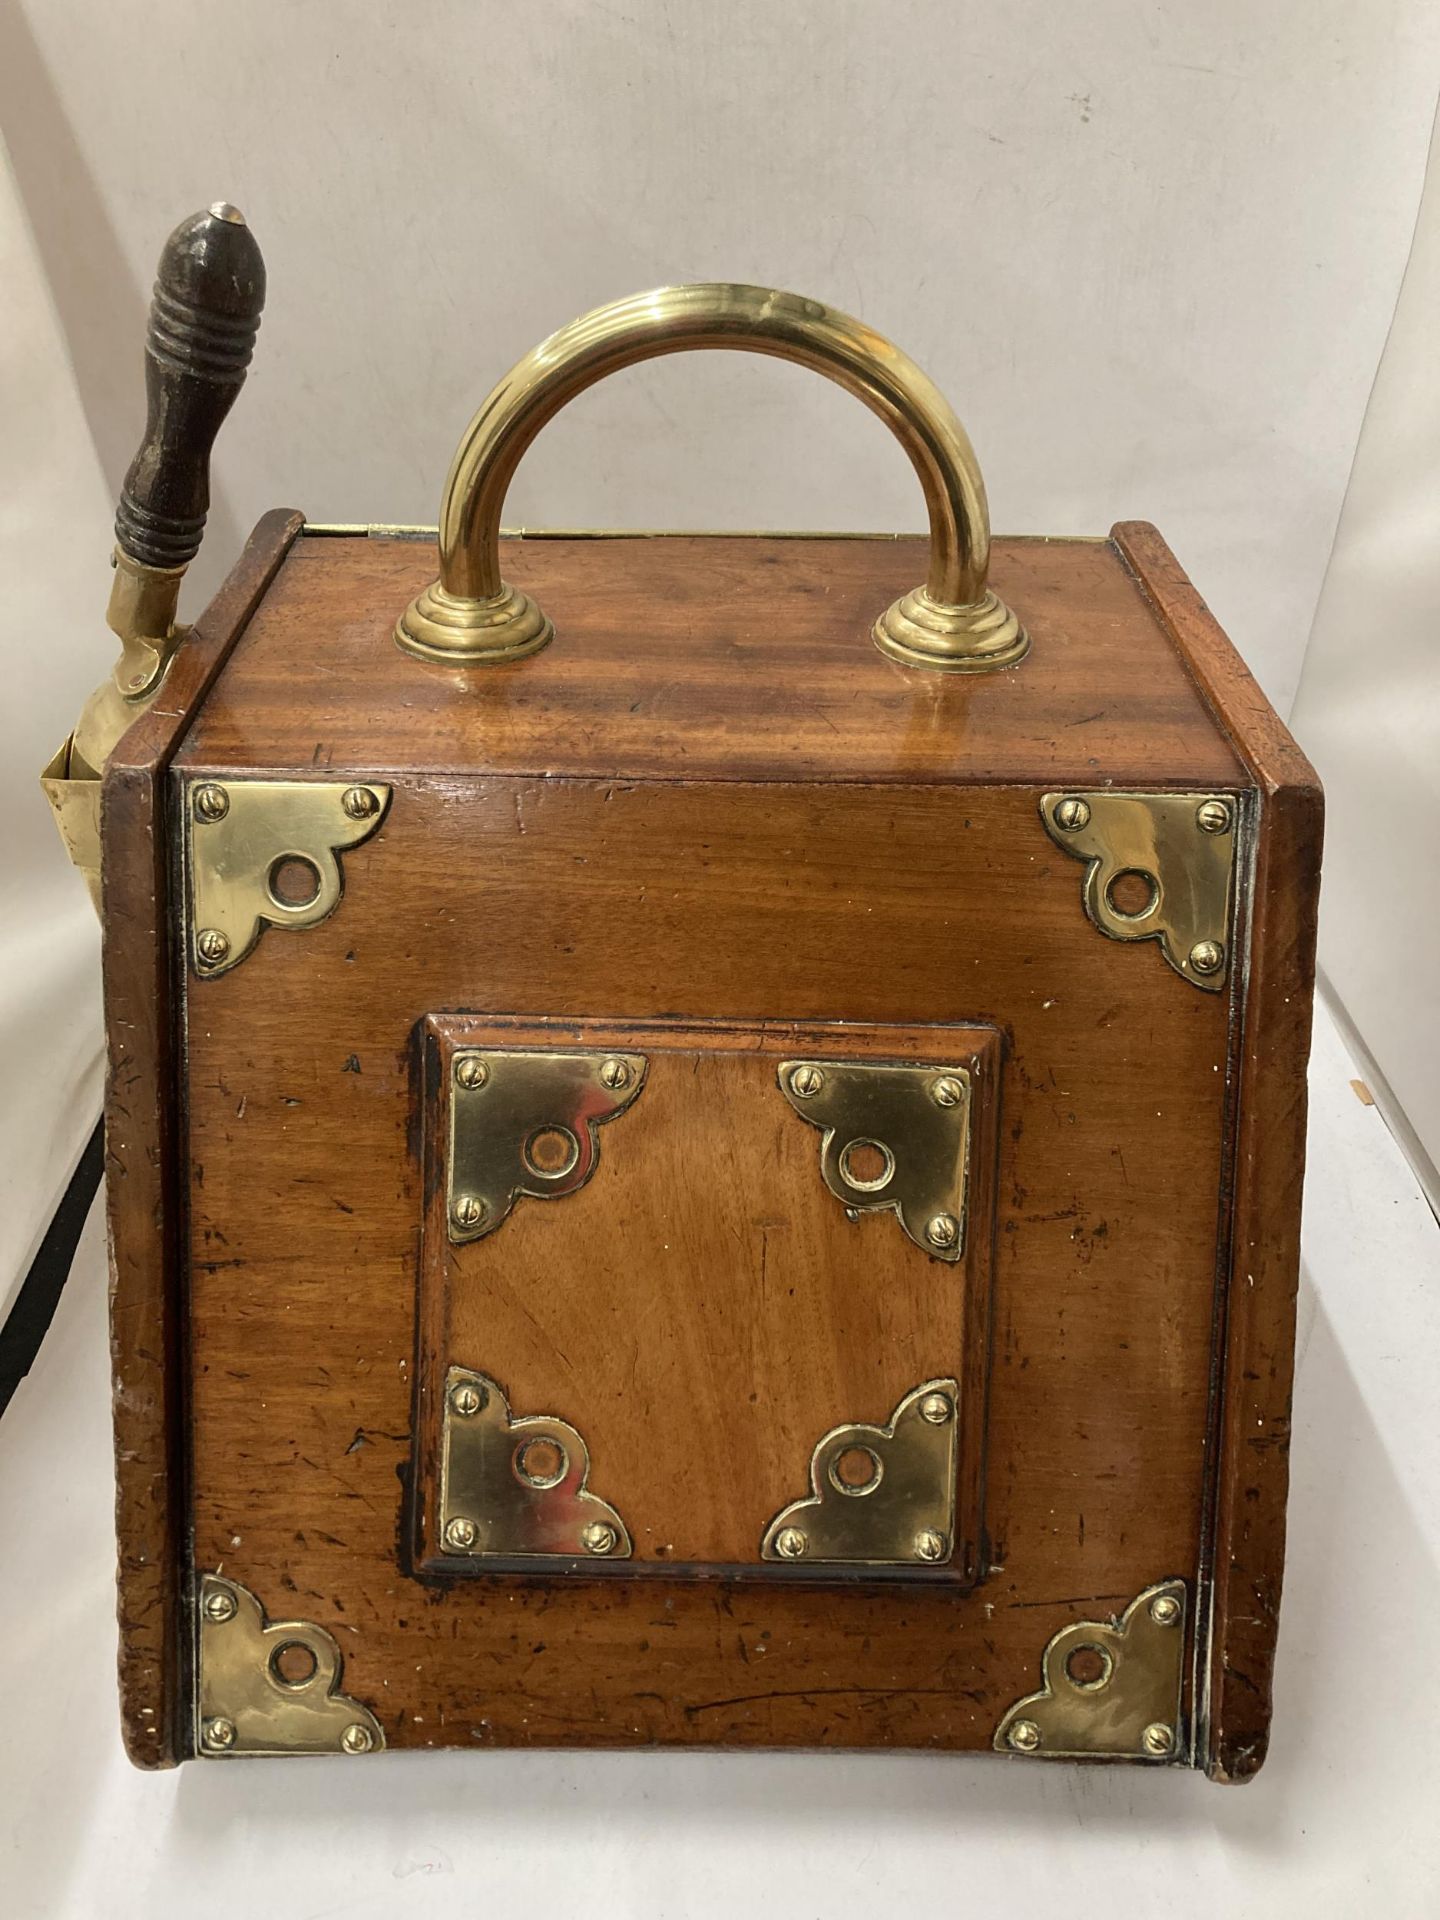 A VICTORIAN MAHOGANY COAL BOX WITH BRASS FITTINGS, SCOOP AND LINER - Image 4 of 5